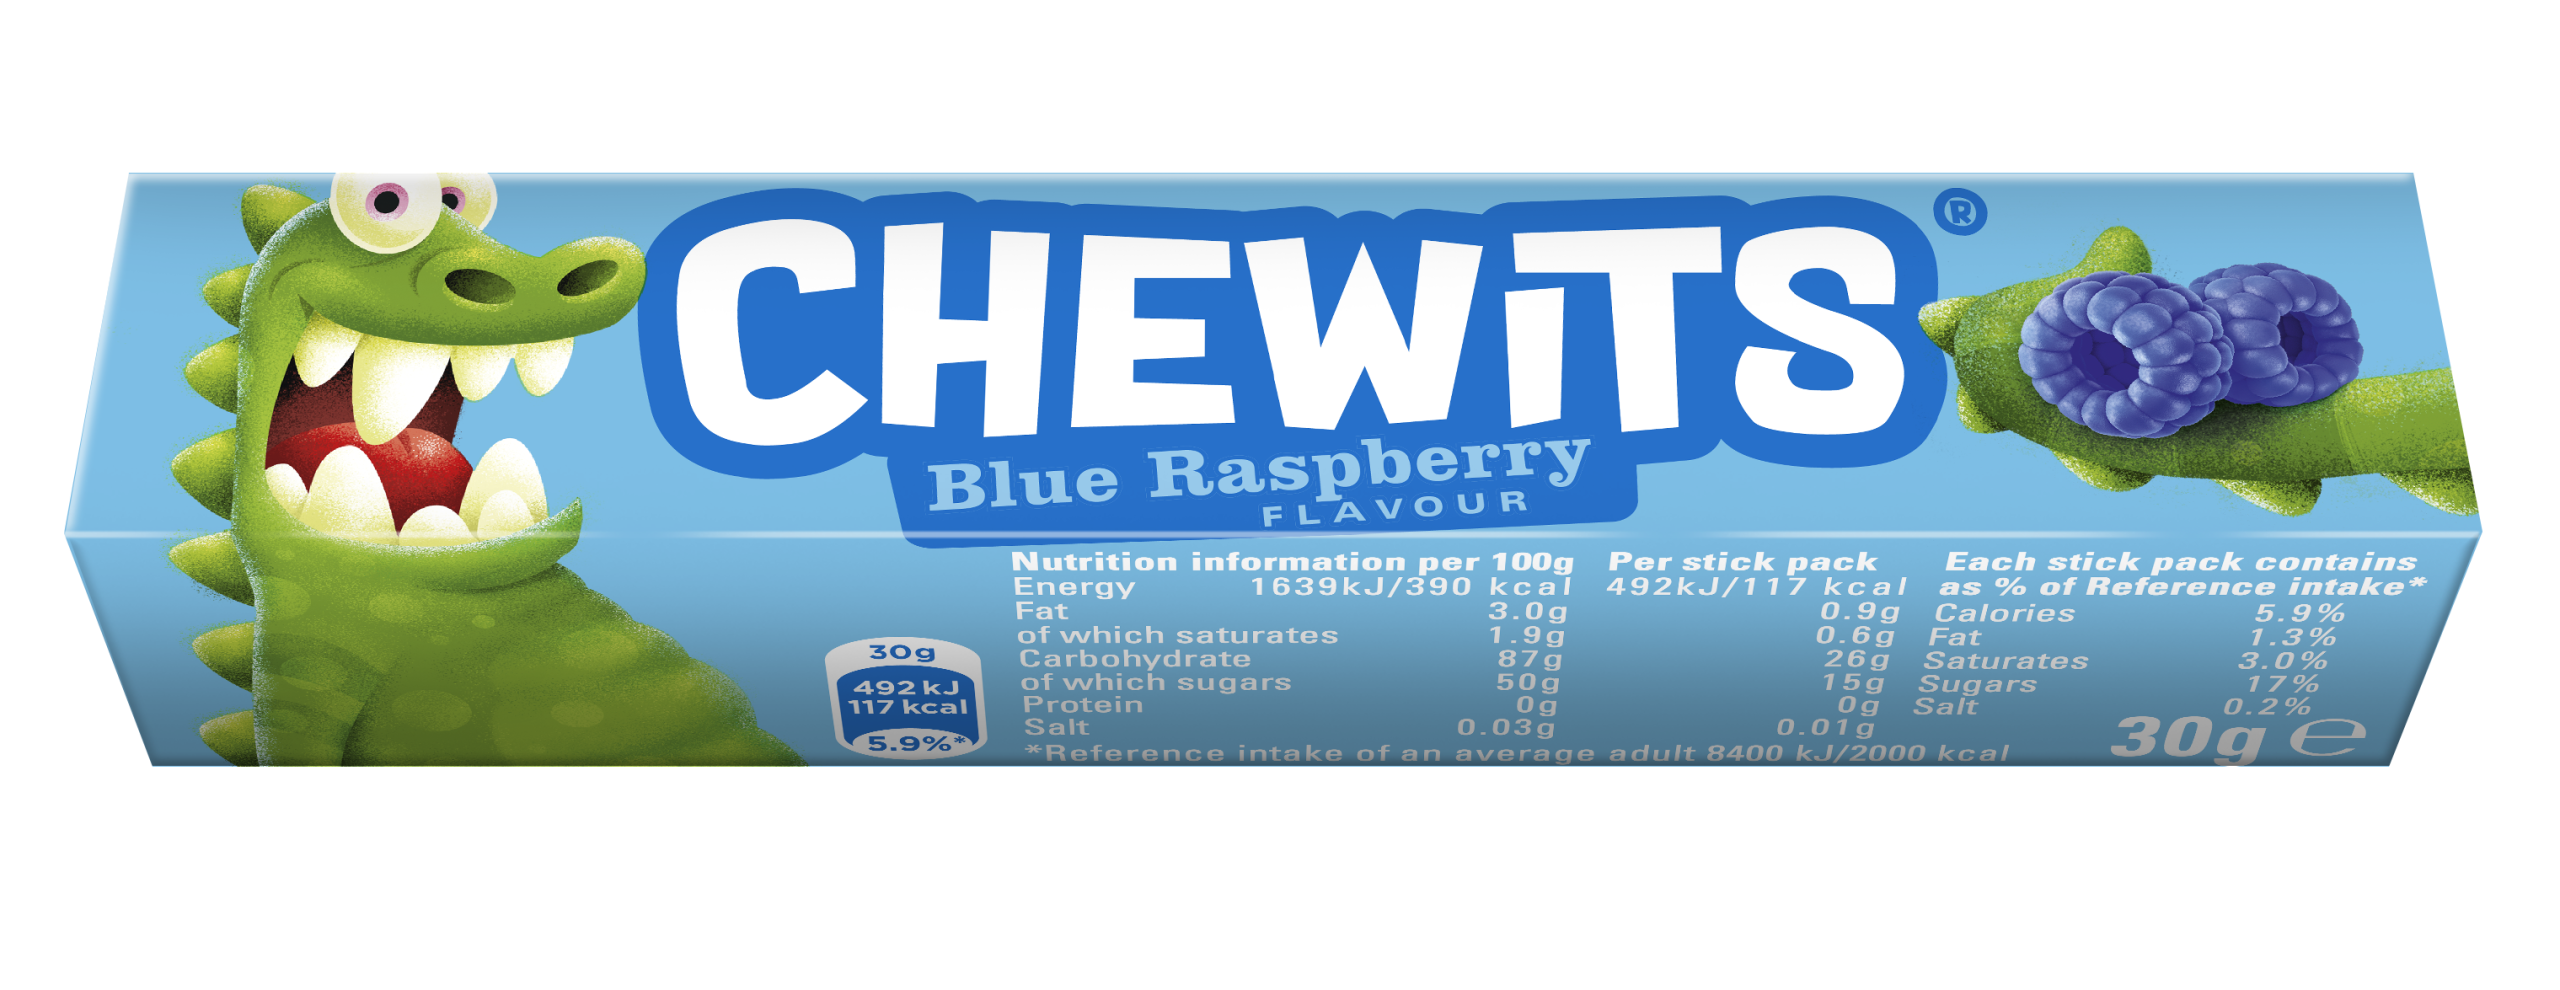 Chewits add four new flavours to its stick pack ranges